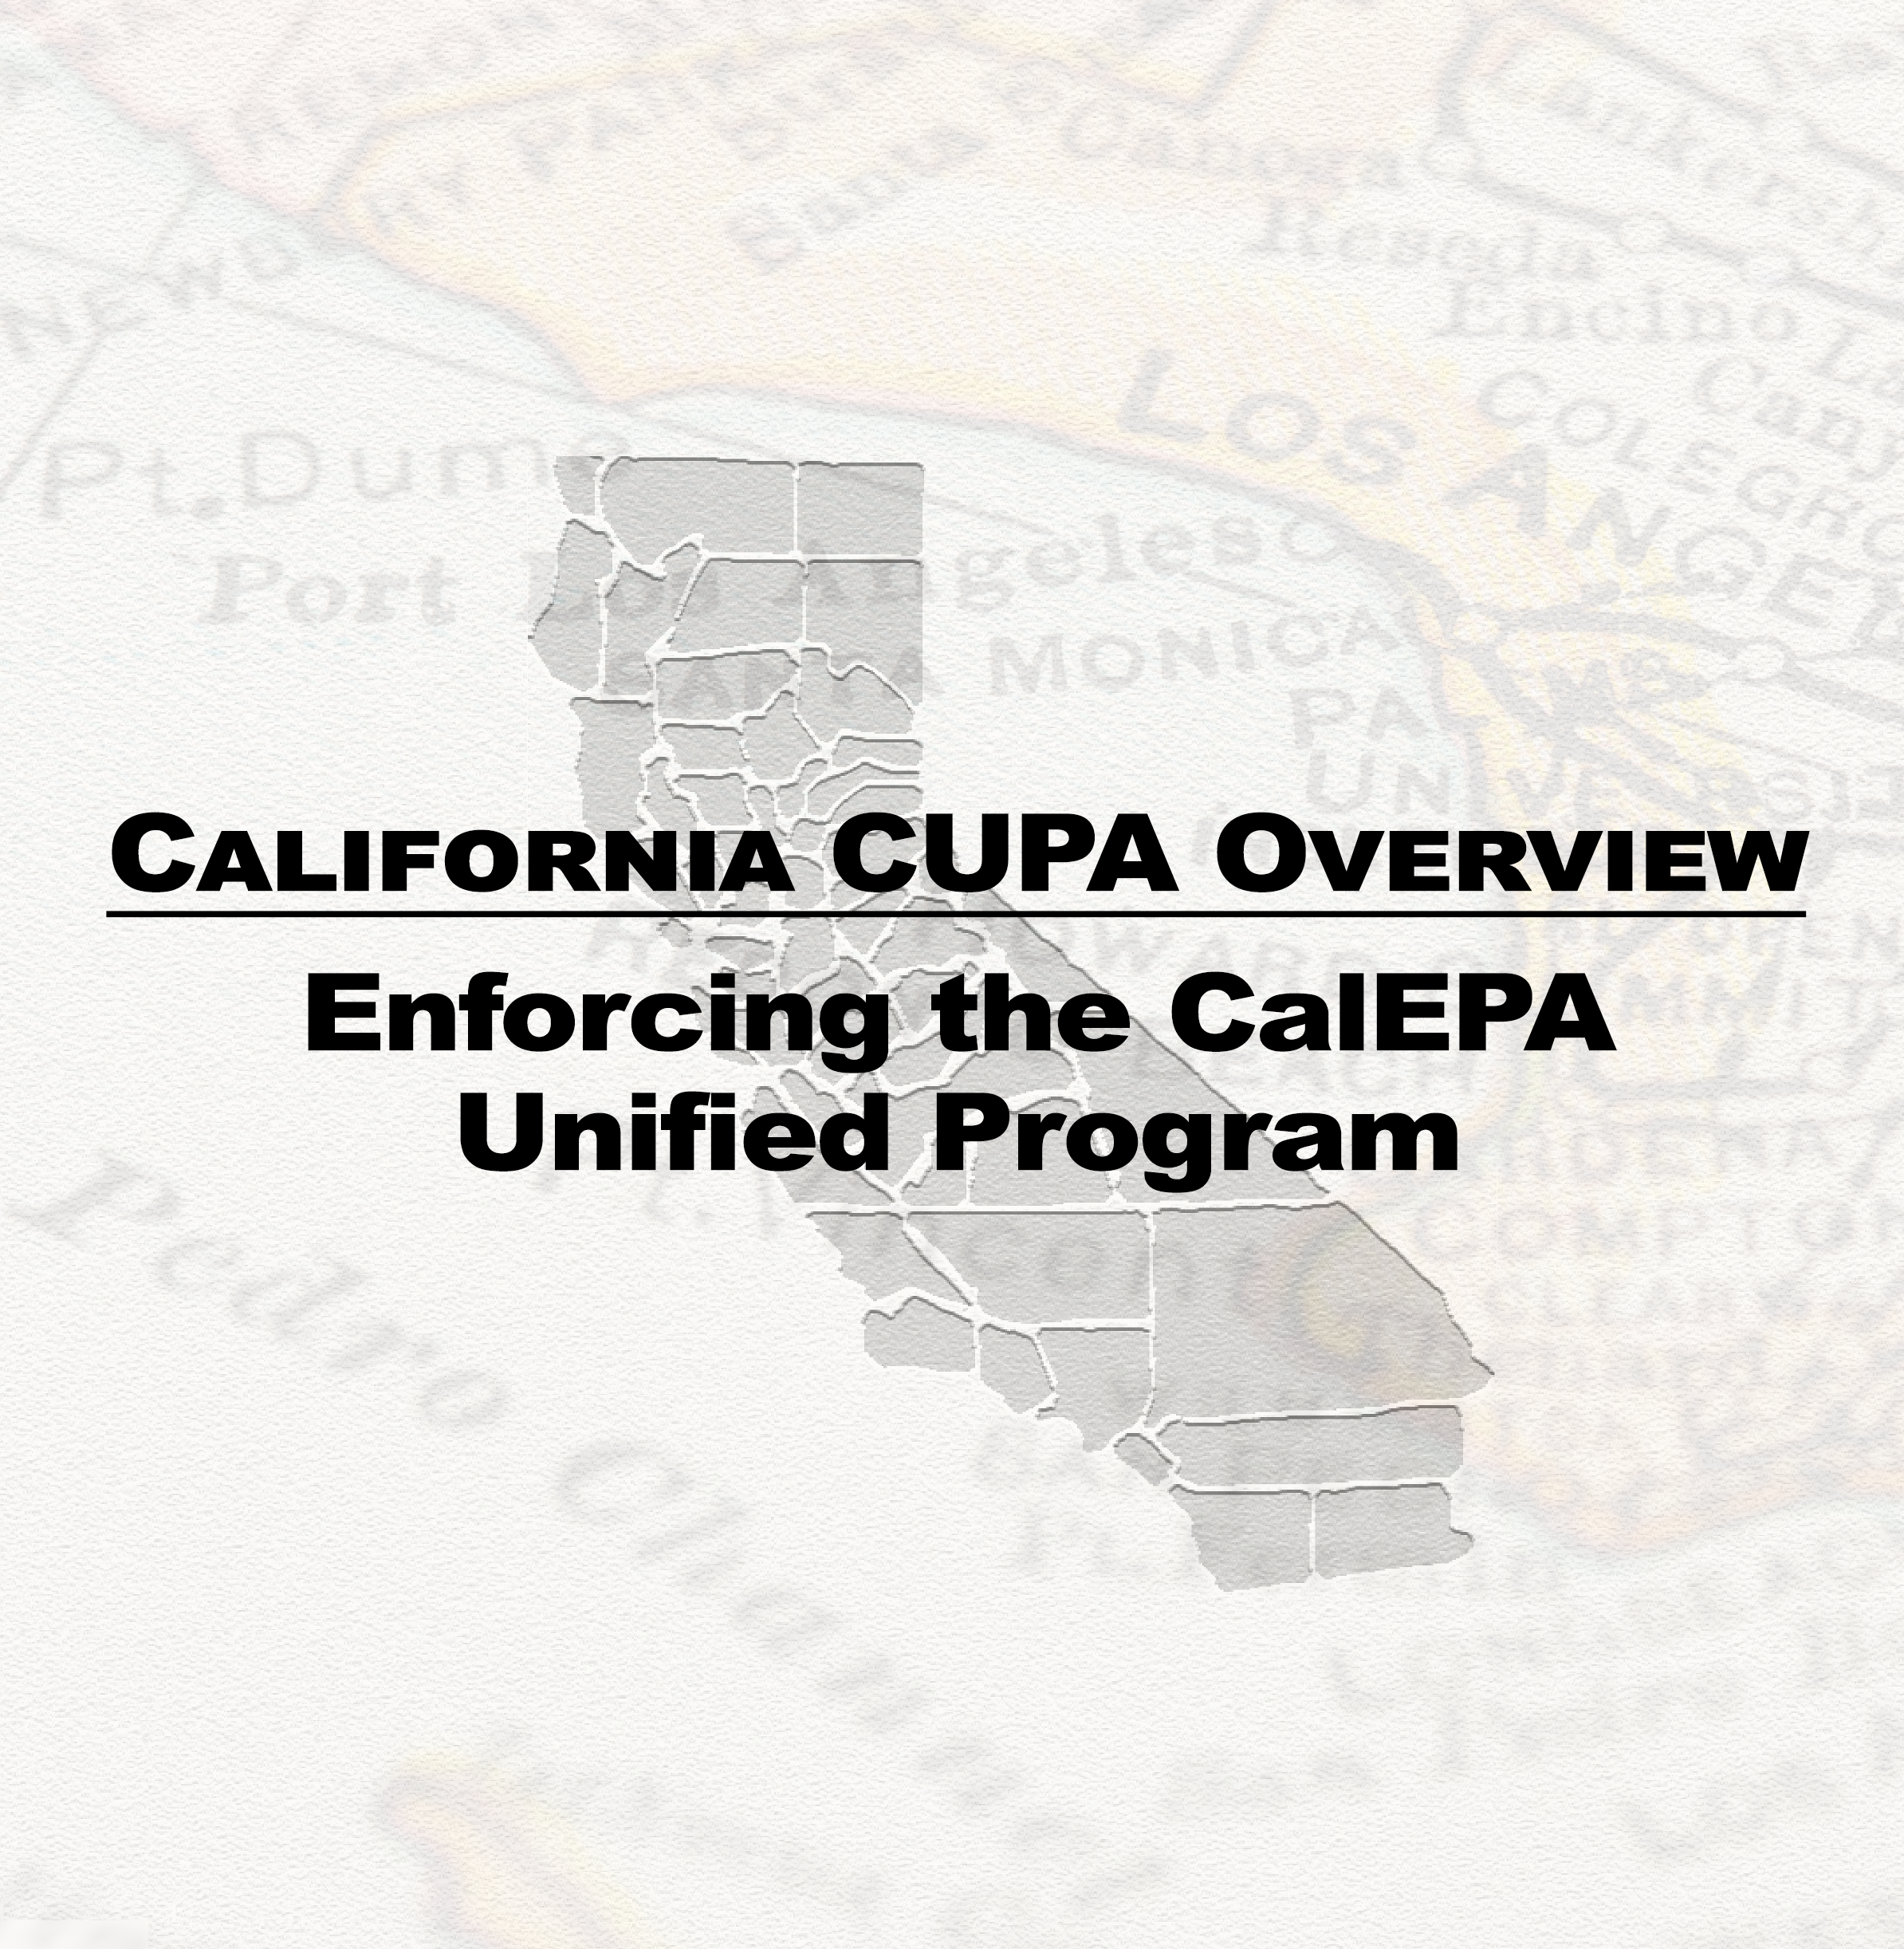 California CUPA Overview: Enforcing the CalEPA Unified Program